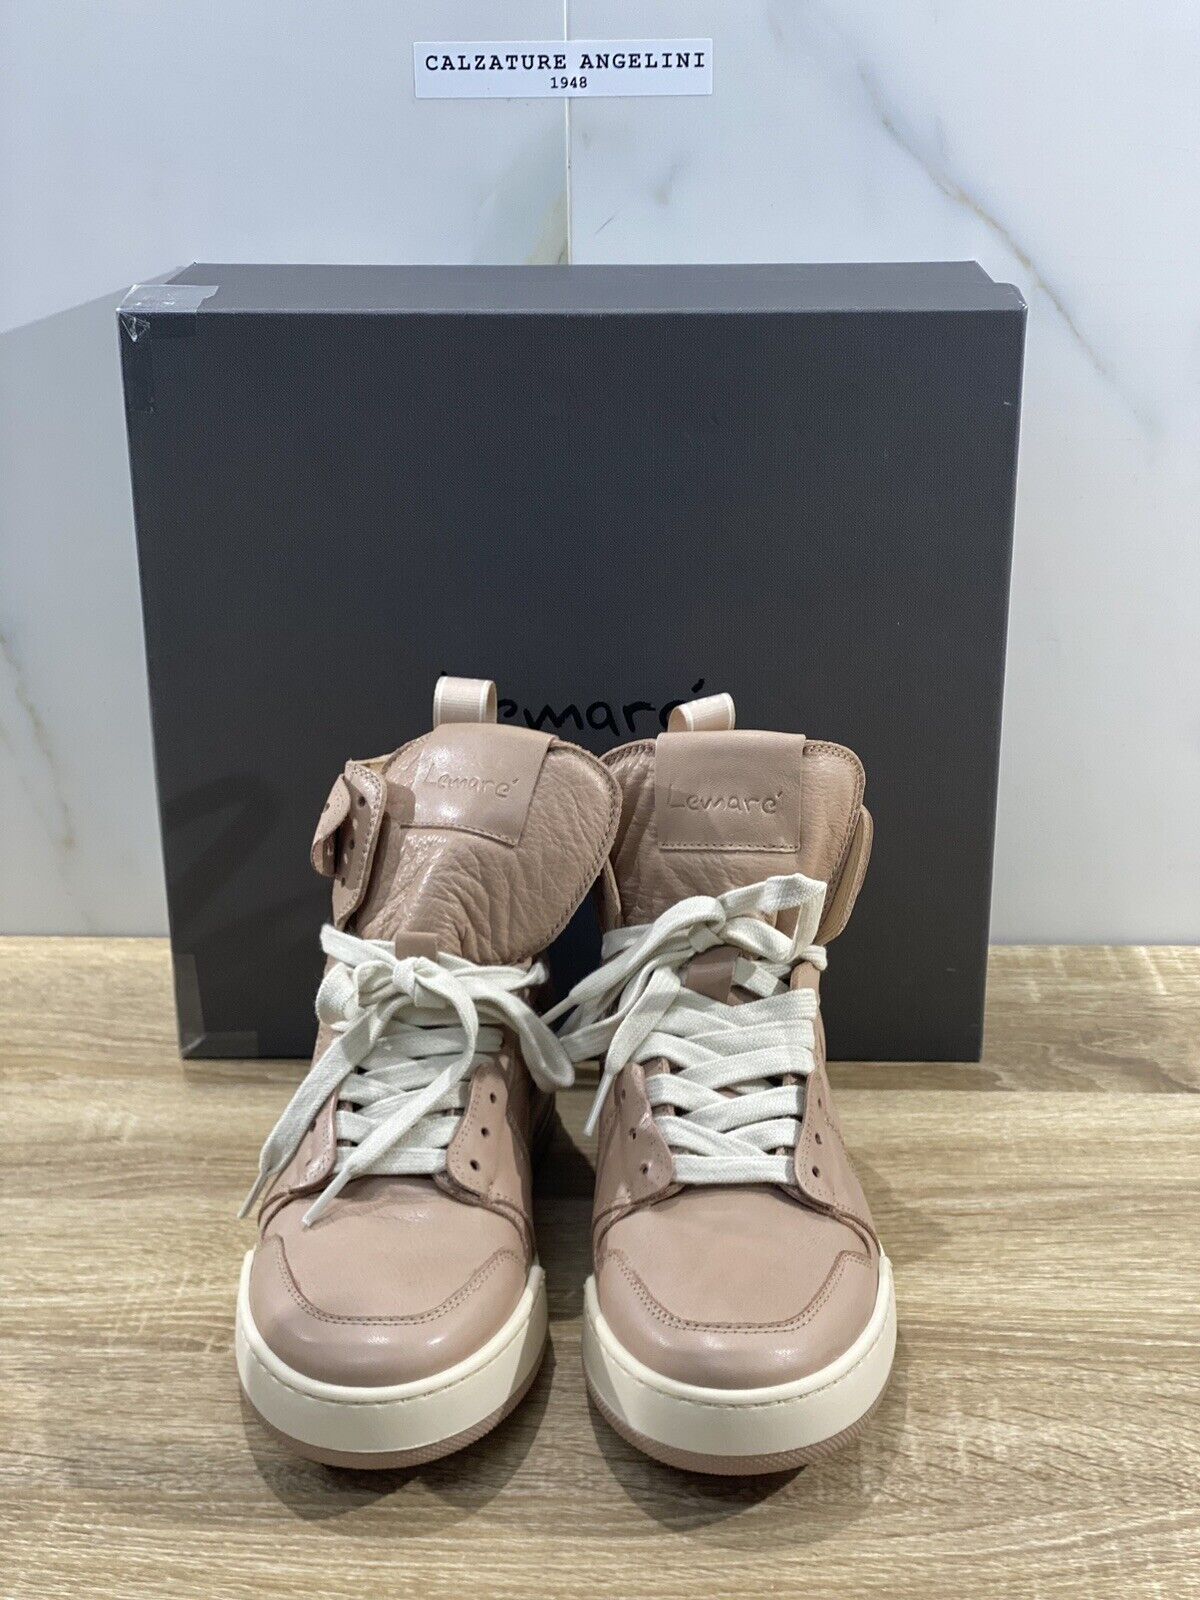 Lemare’ sneaker donna 3013 hi top pelle nude fondo gomma casual shoes 37